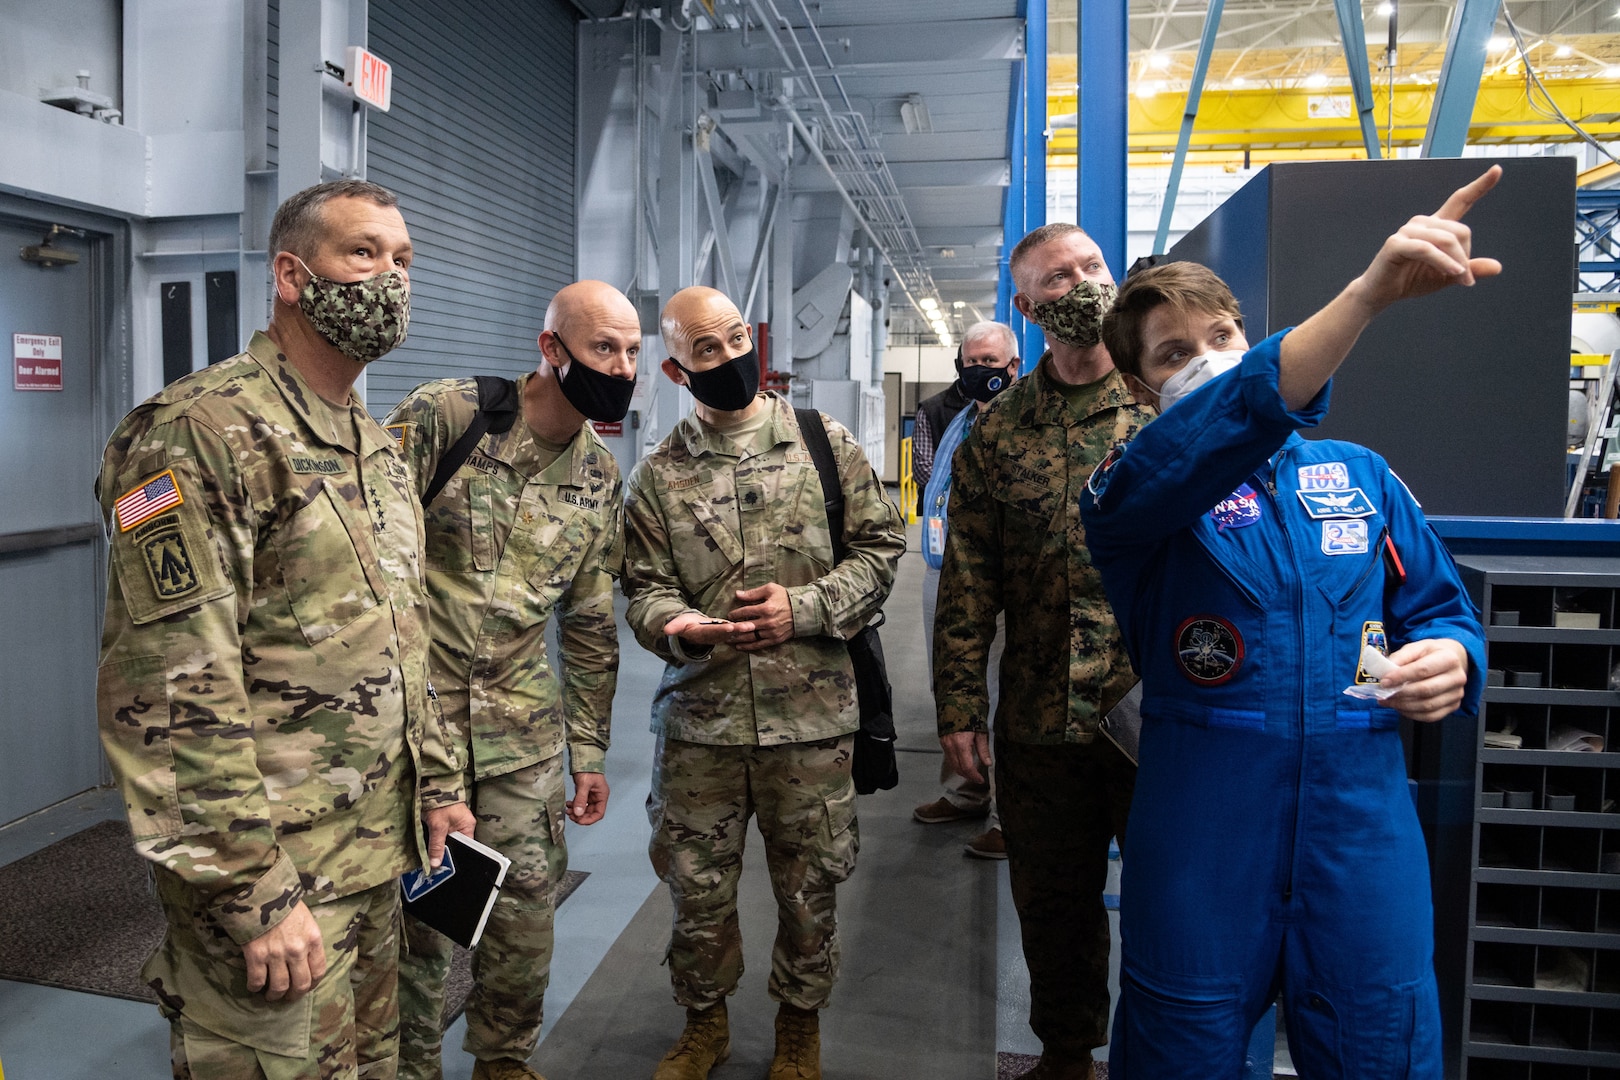 Astronaut gives tour to U.S. Space Command personnel.